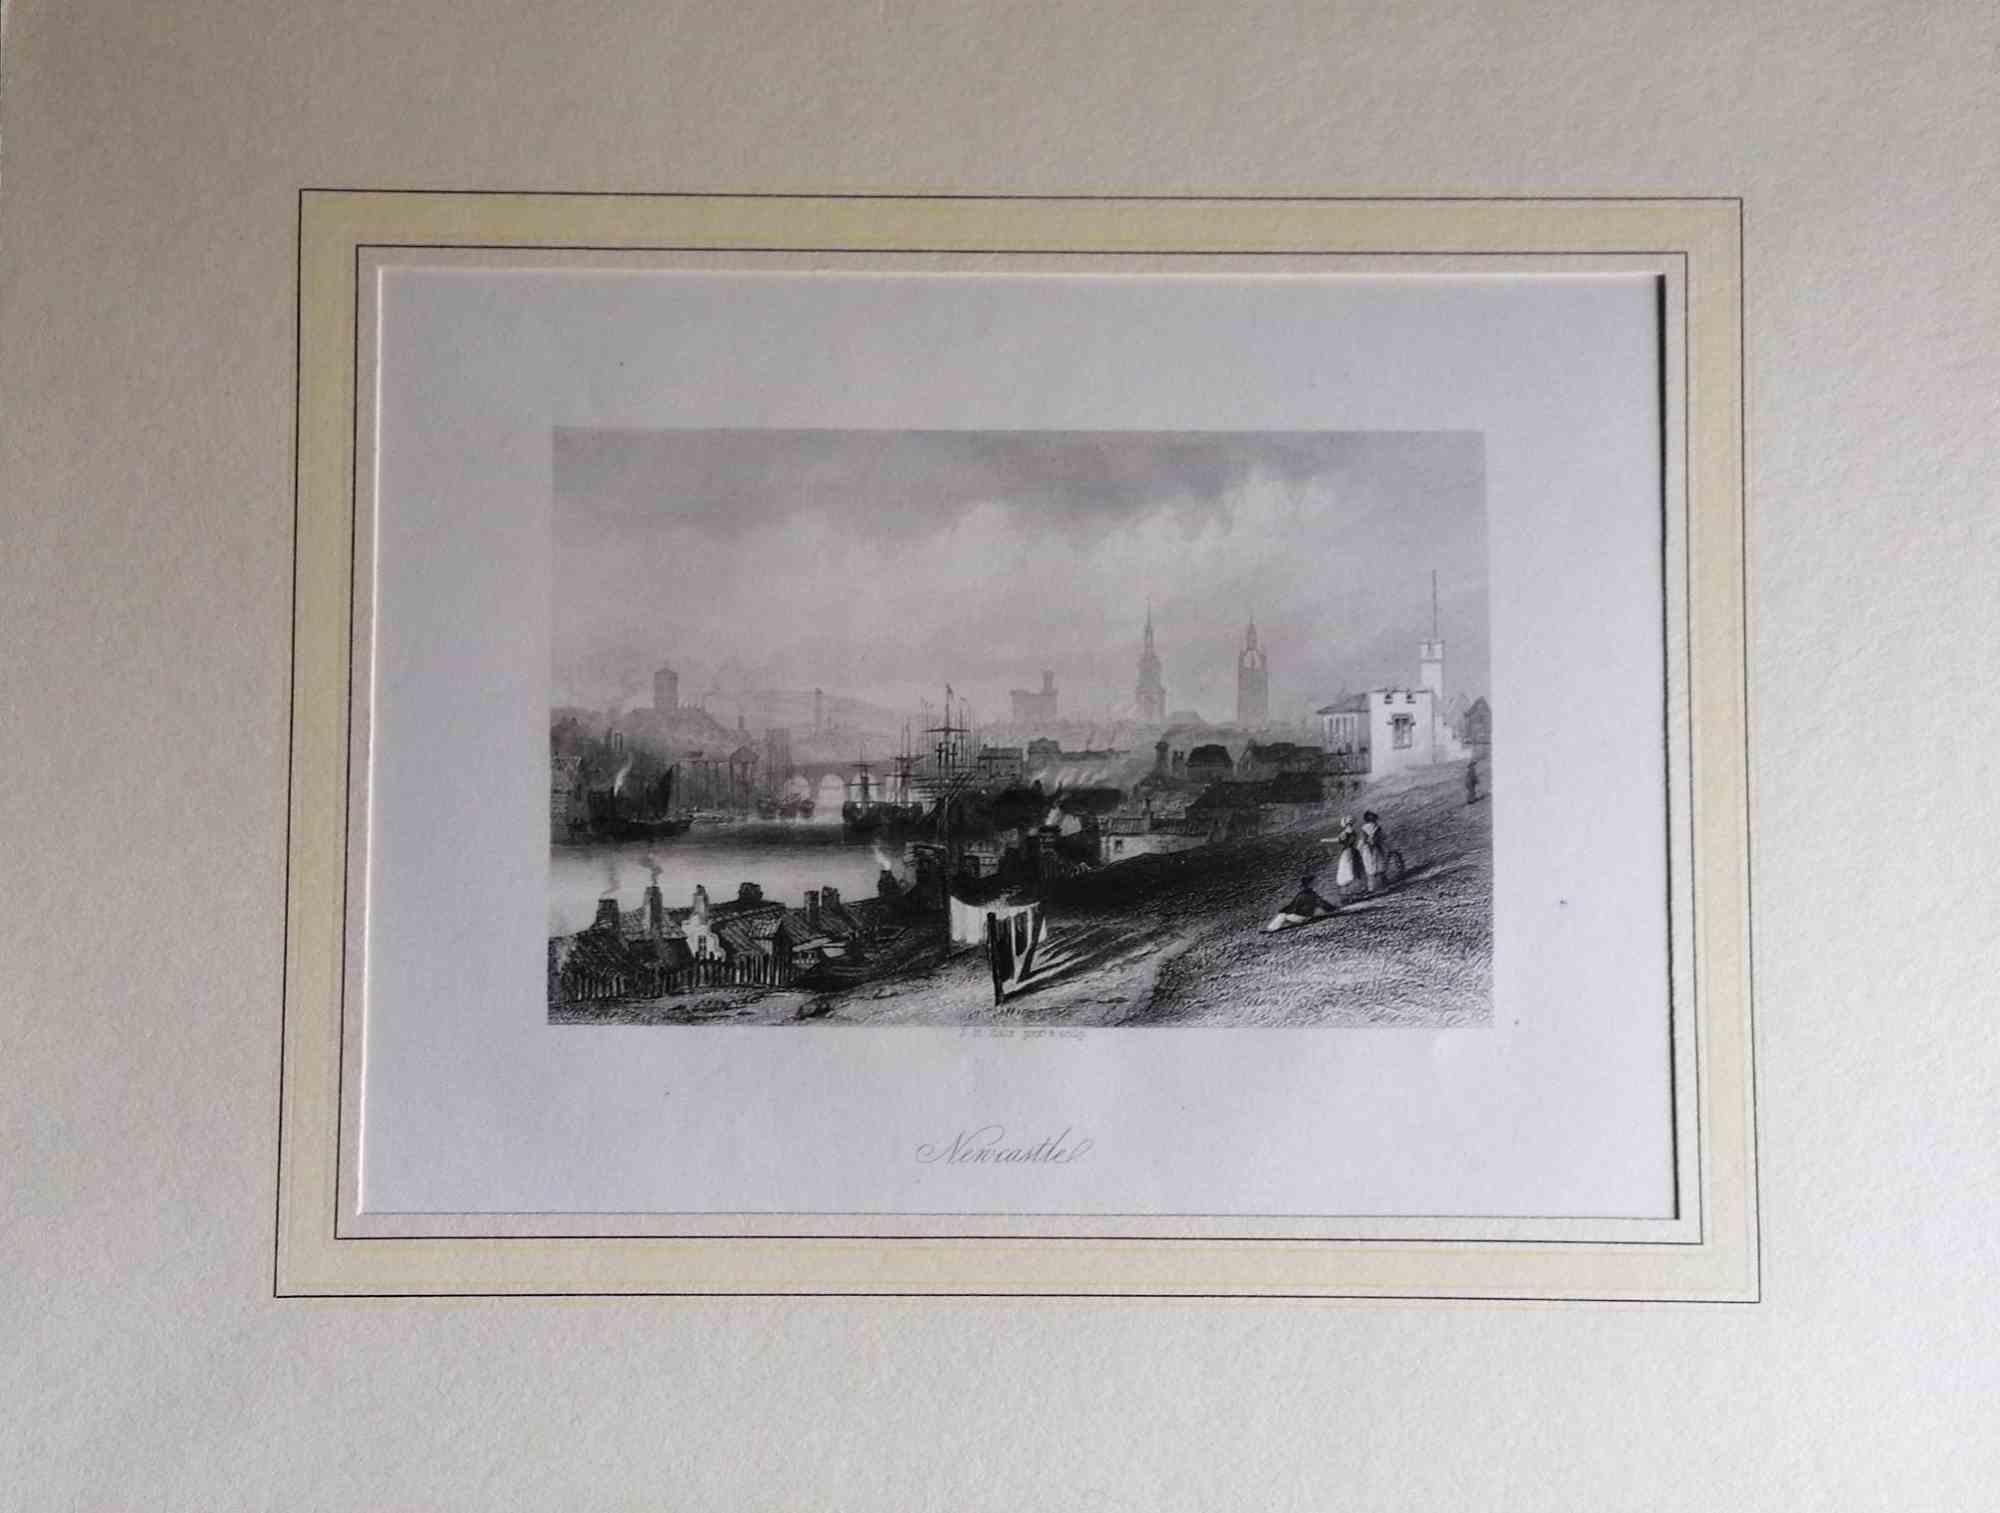 Unknown Figurative Print - Ancient View of Newcastle - Original Lithograph - Mid-19th Century